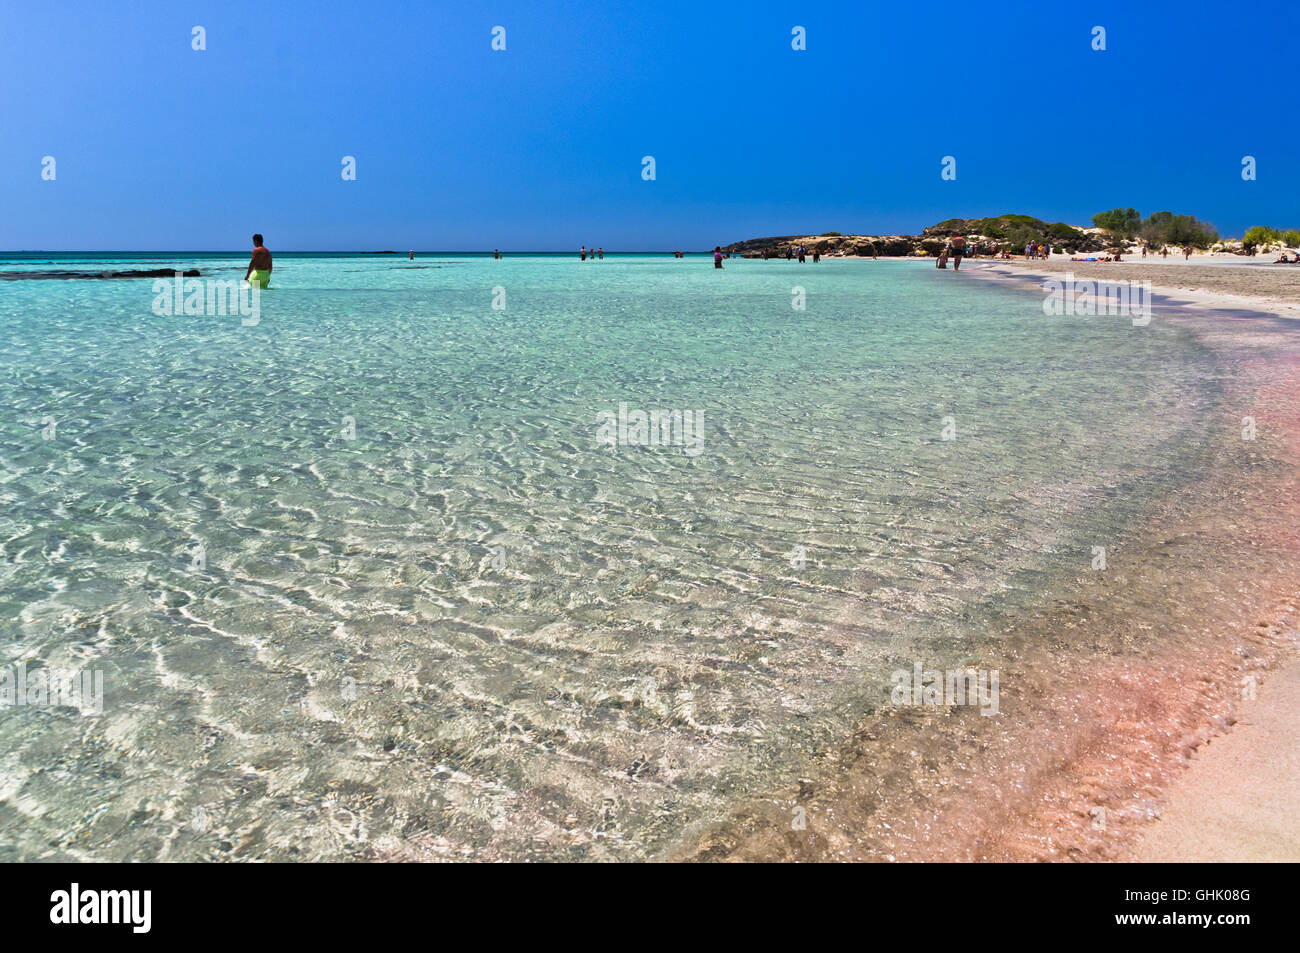 Amazing beauty of shallow crystal clear waters at Elafonisi beach, island of Crete Stock Photo